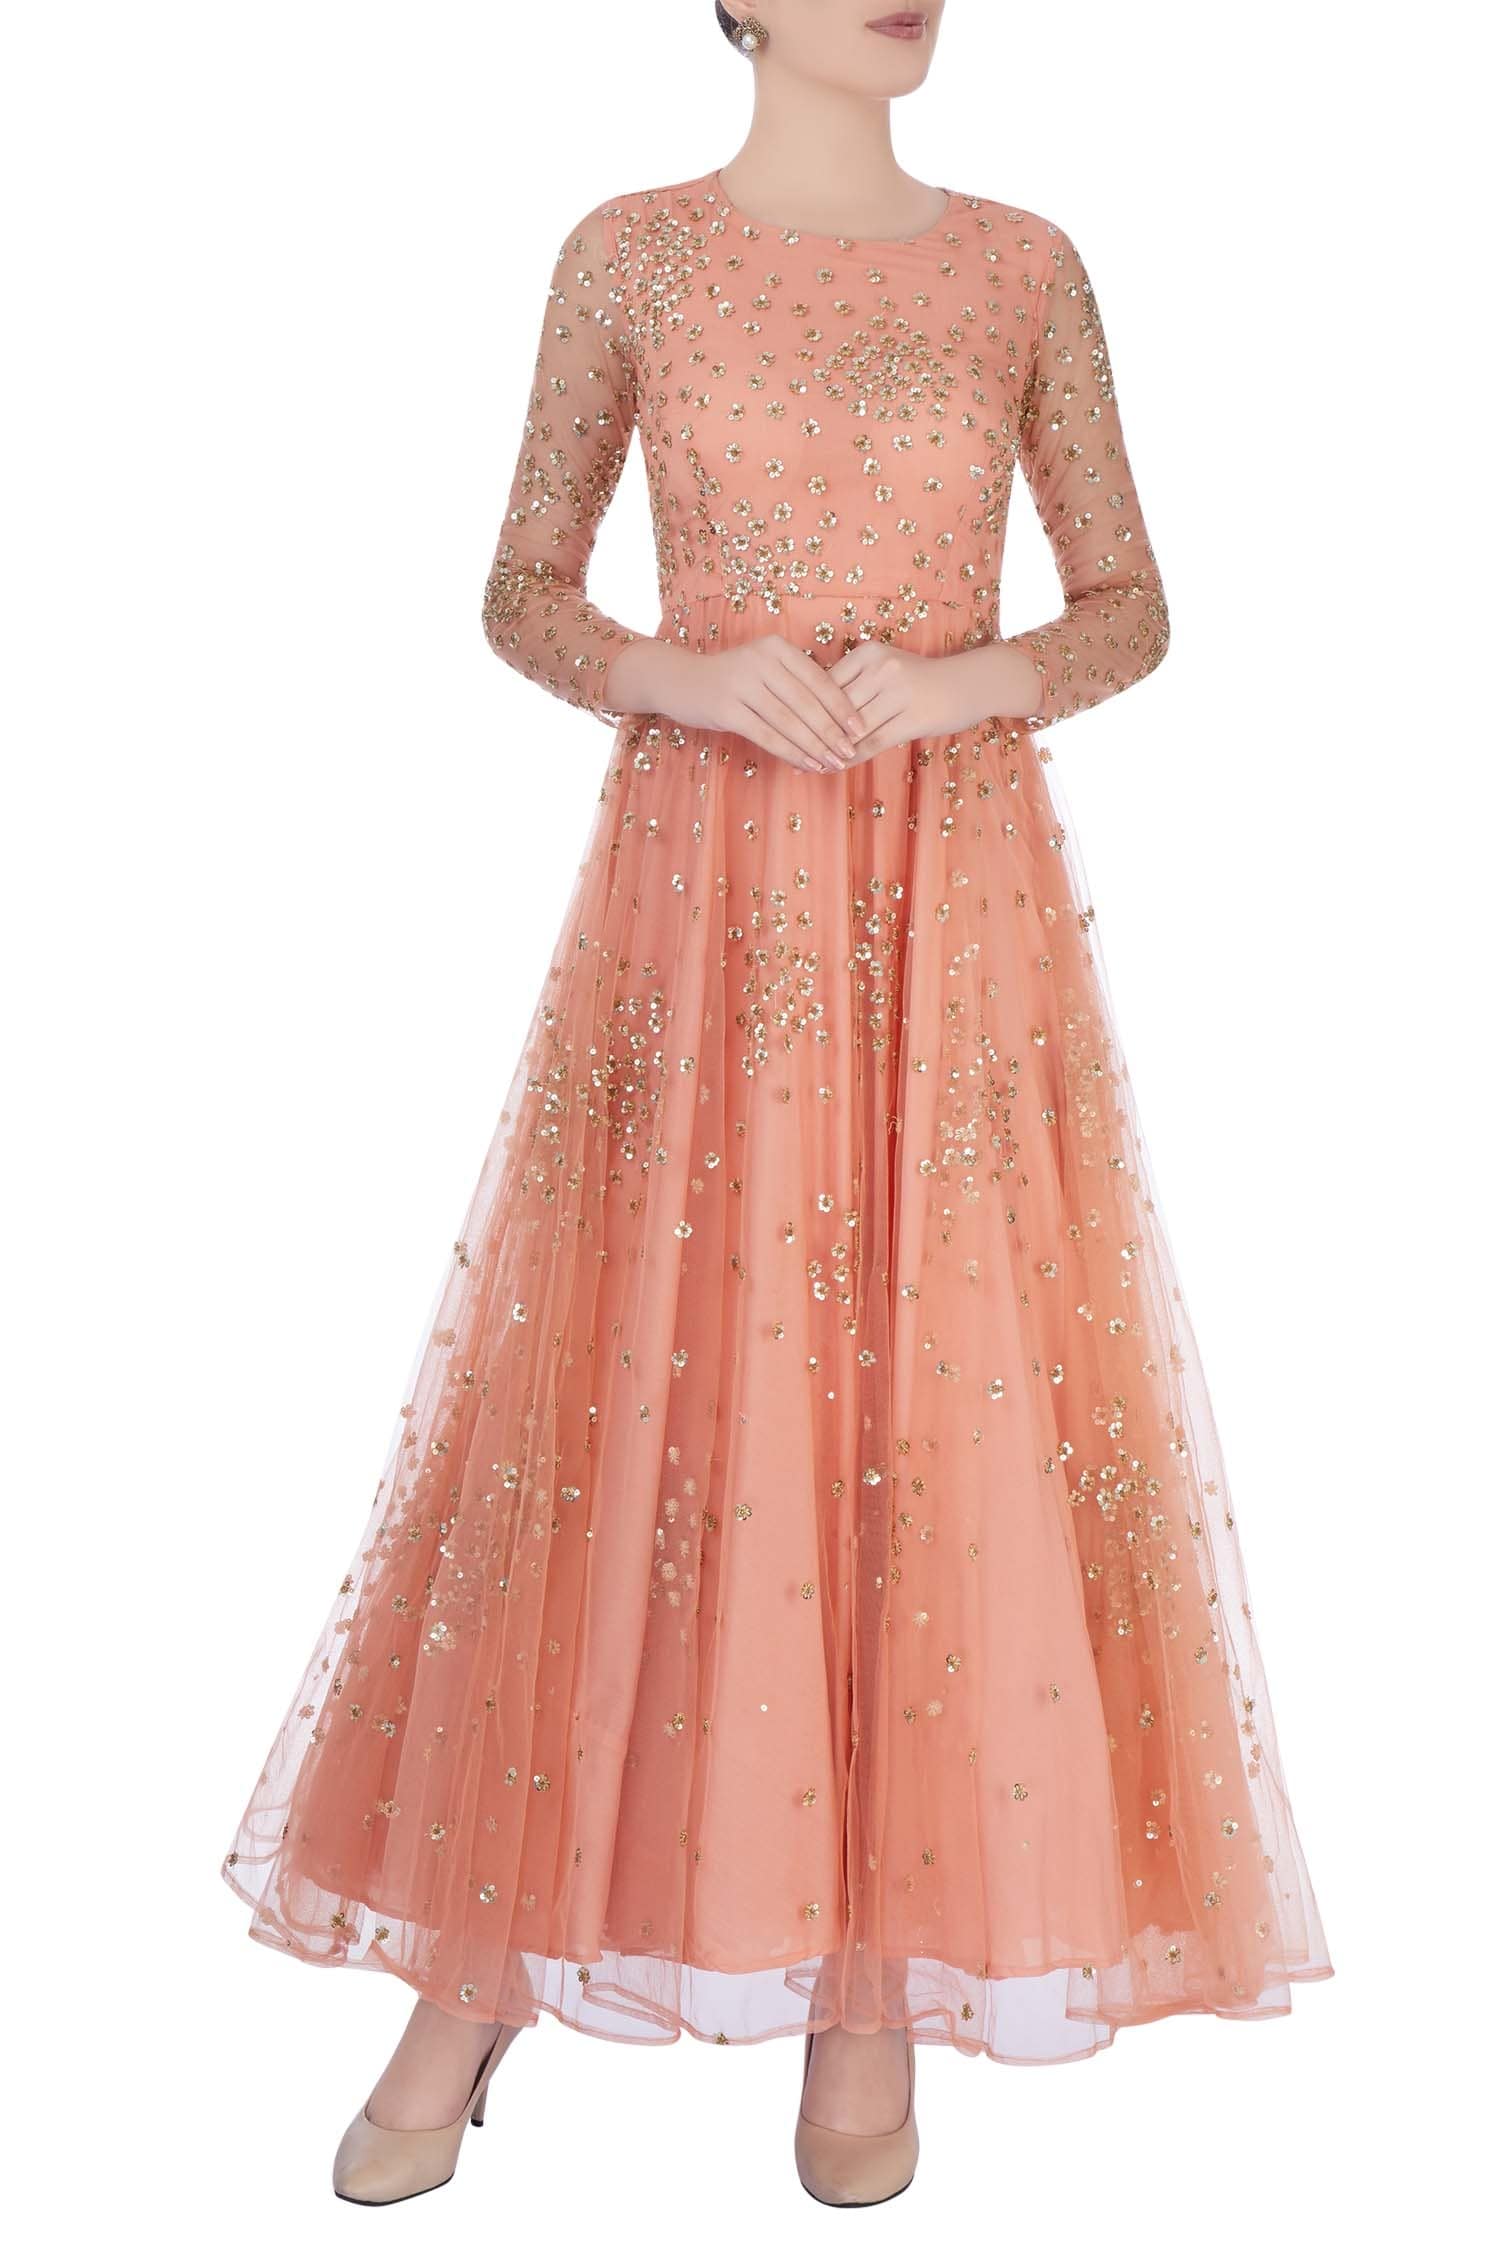 Astha Narang Peach Embellished Sequin Round Neck Tunic For Women